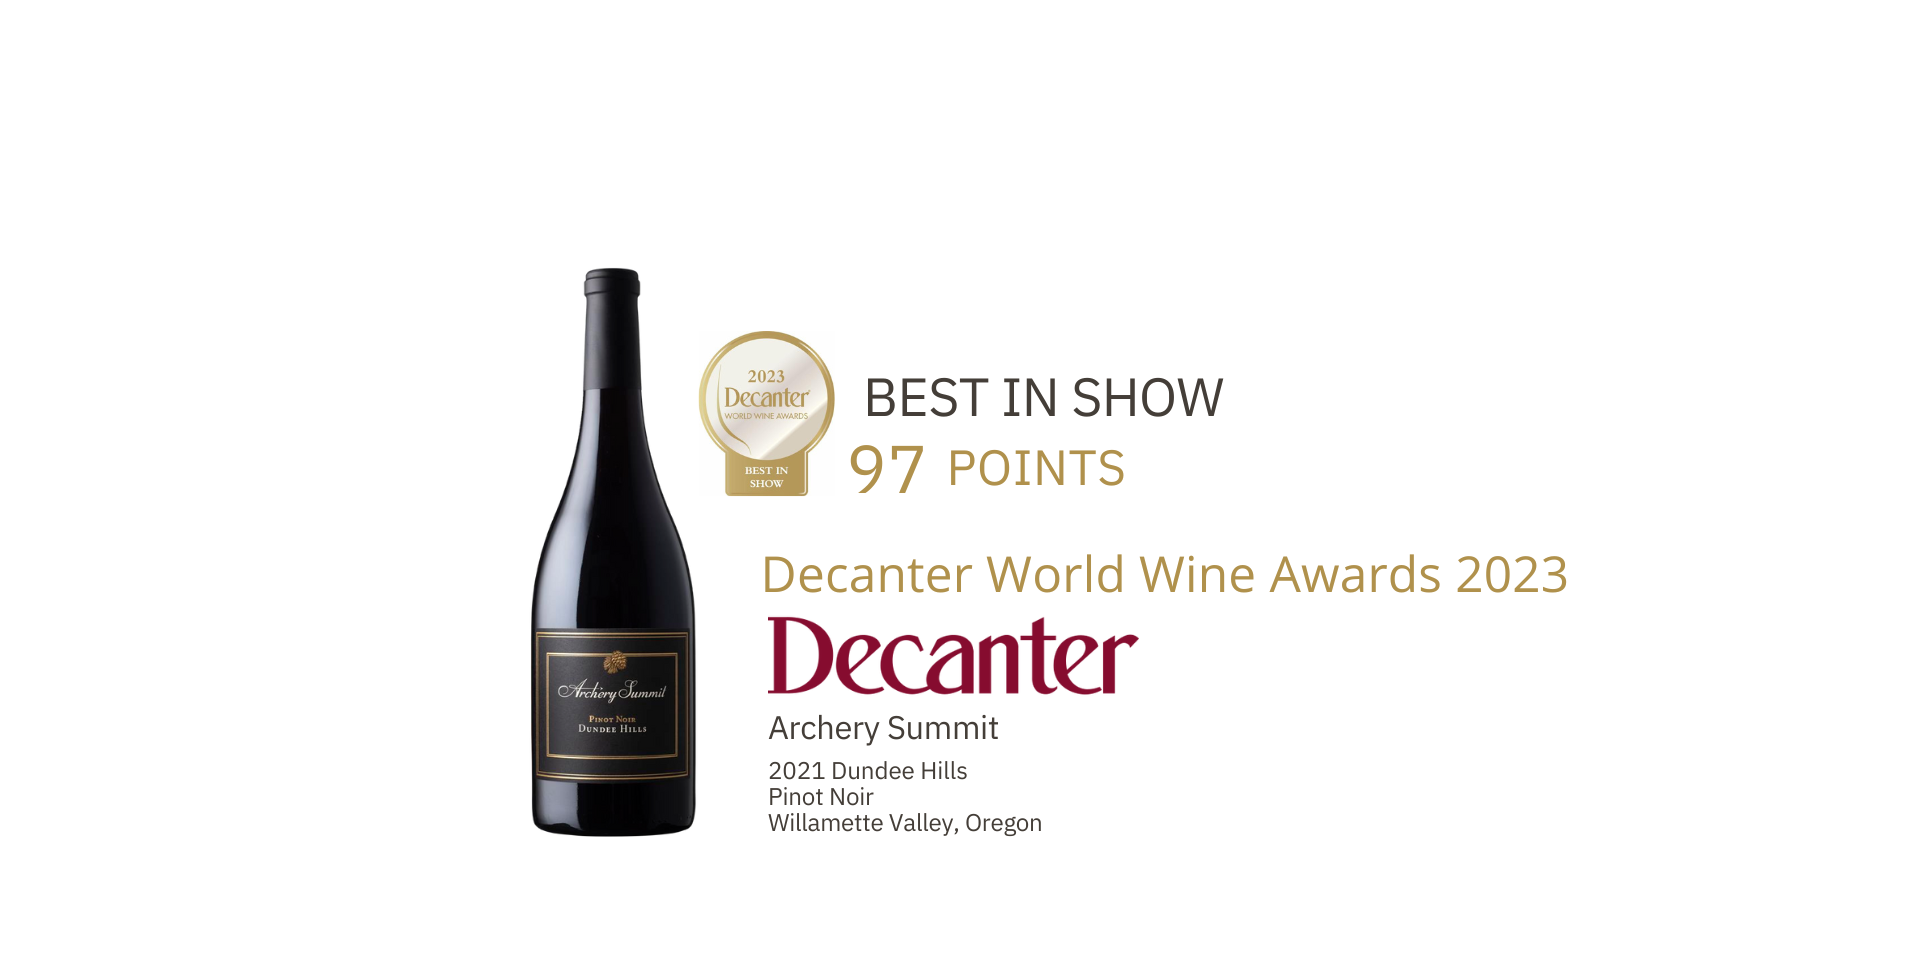 Decanter World Wine Award and 97 Points